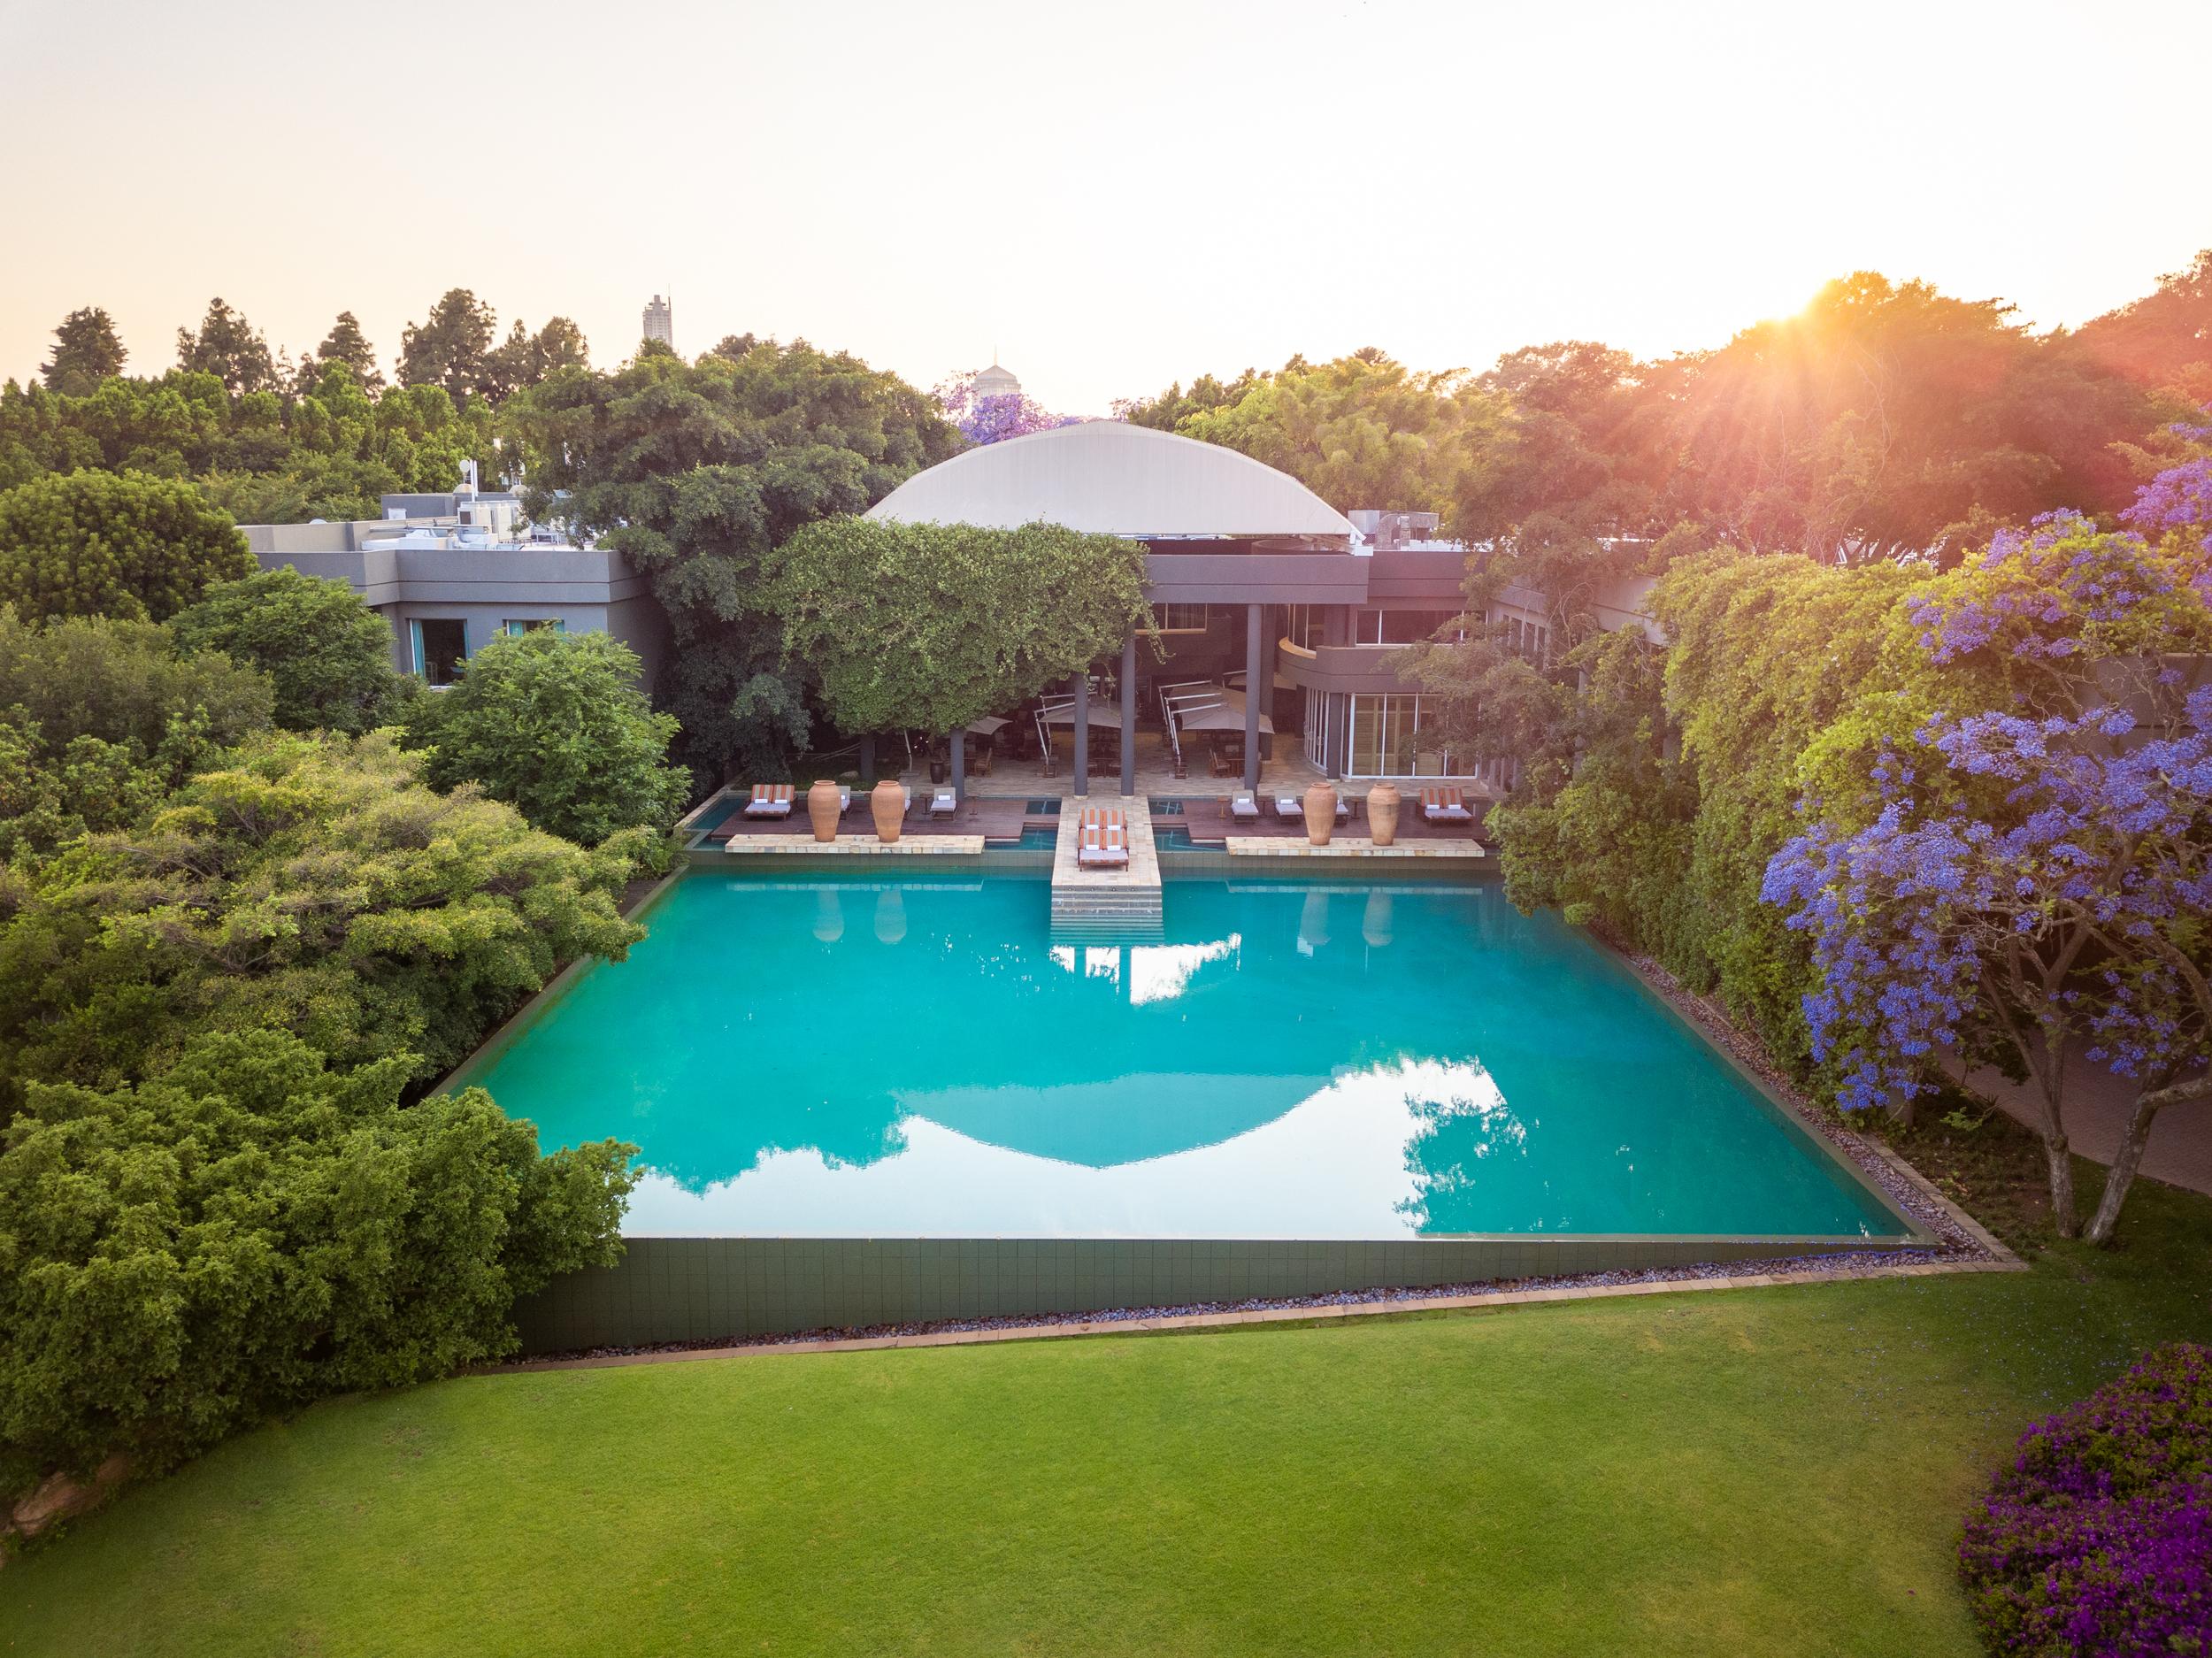 Saxon Hotel, Villas And Spa in Johannesburg, South Africa